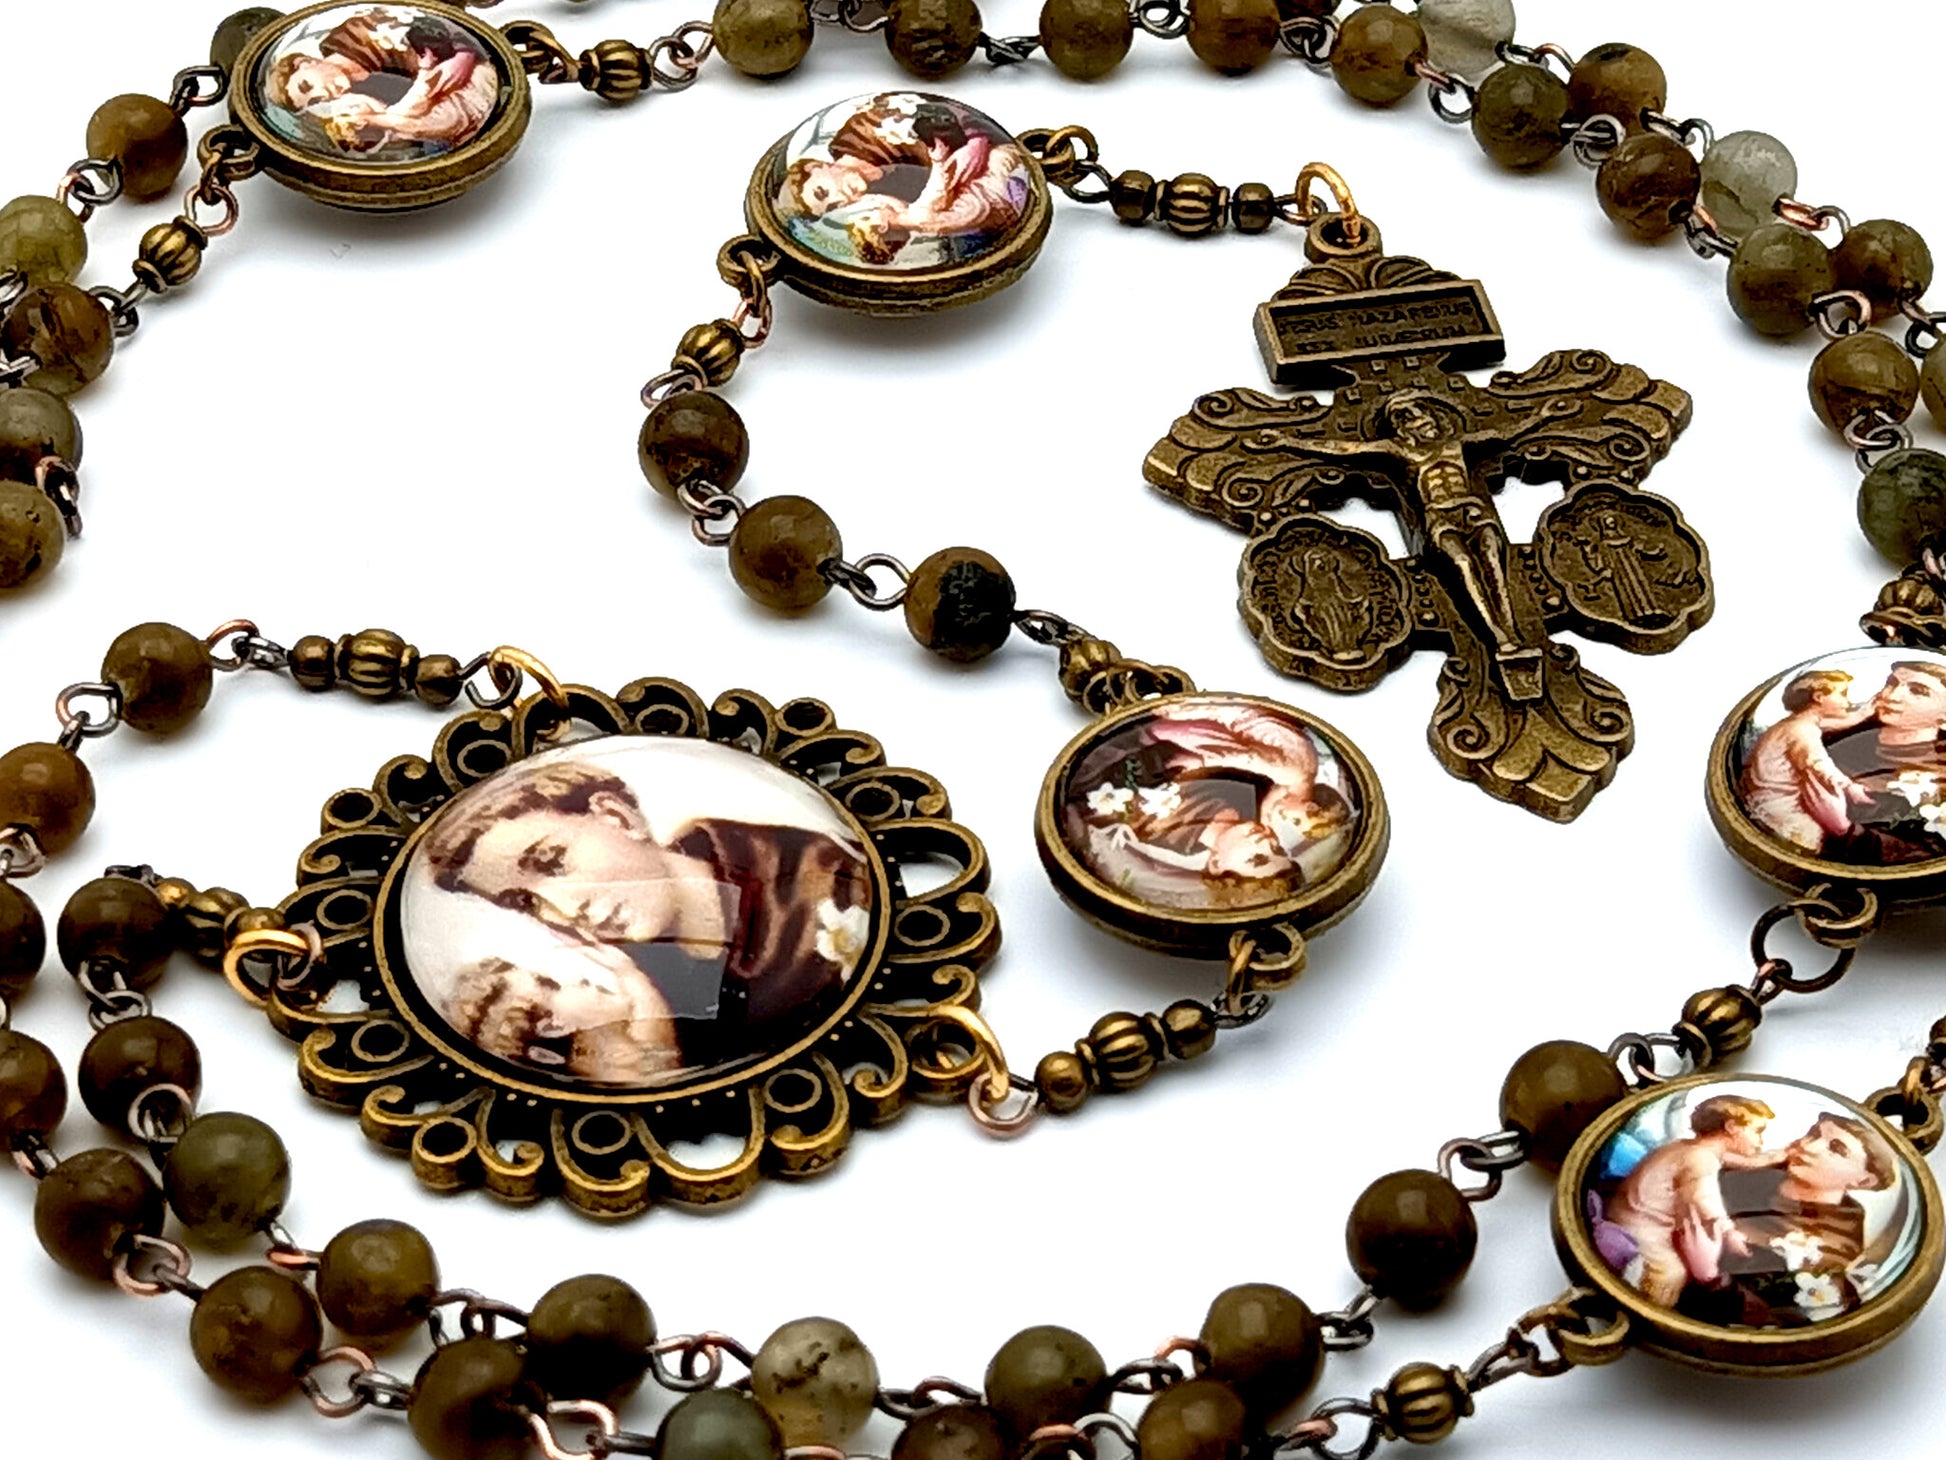 Saint Anthony of Padua unique rosary beads with agate gemstone beads and double sided domed Saint Anthony picture medals and Miraculous medal brass crucifix.